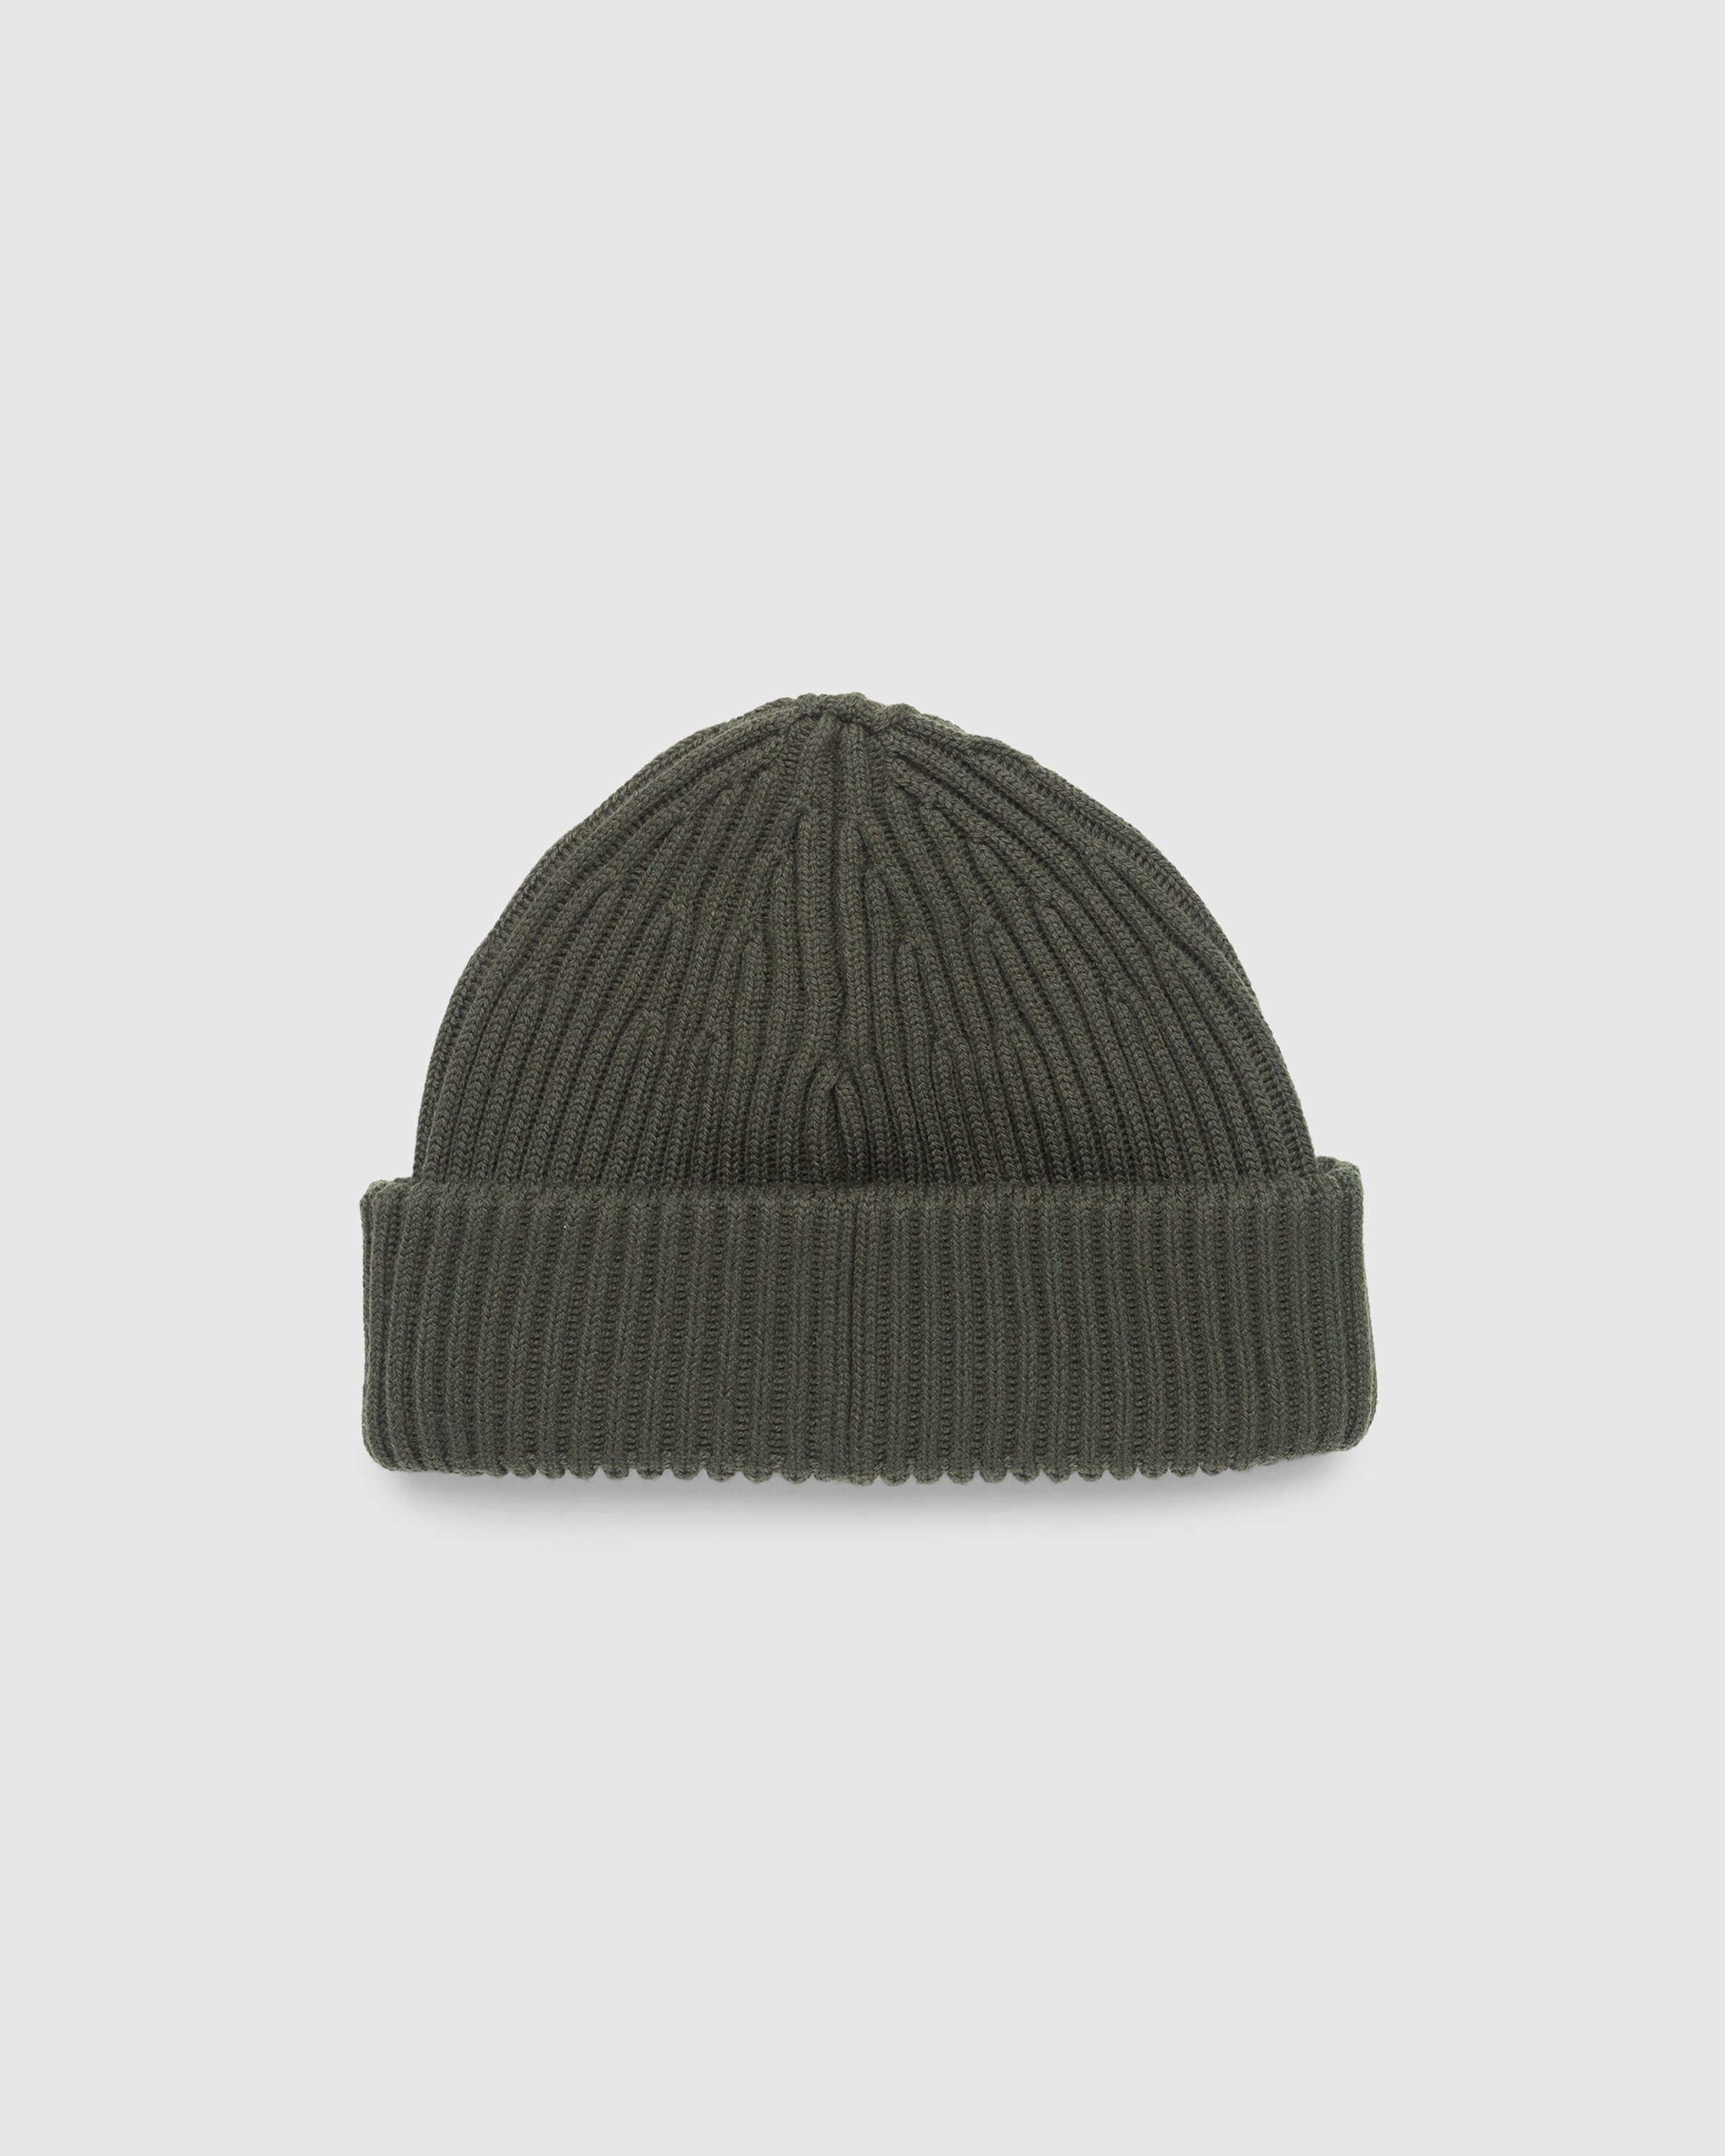 Stone Island - Ribbed Wool Beanie Olive - Accessories - Green - Image 2